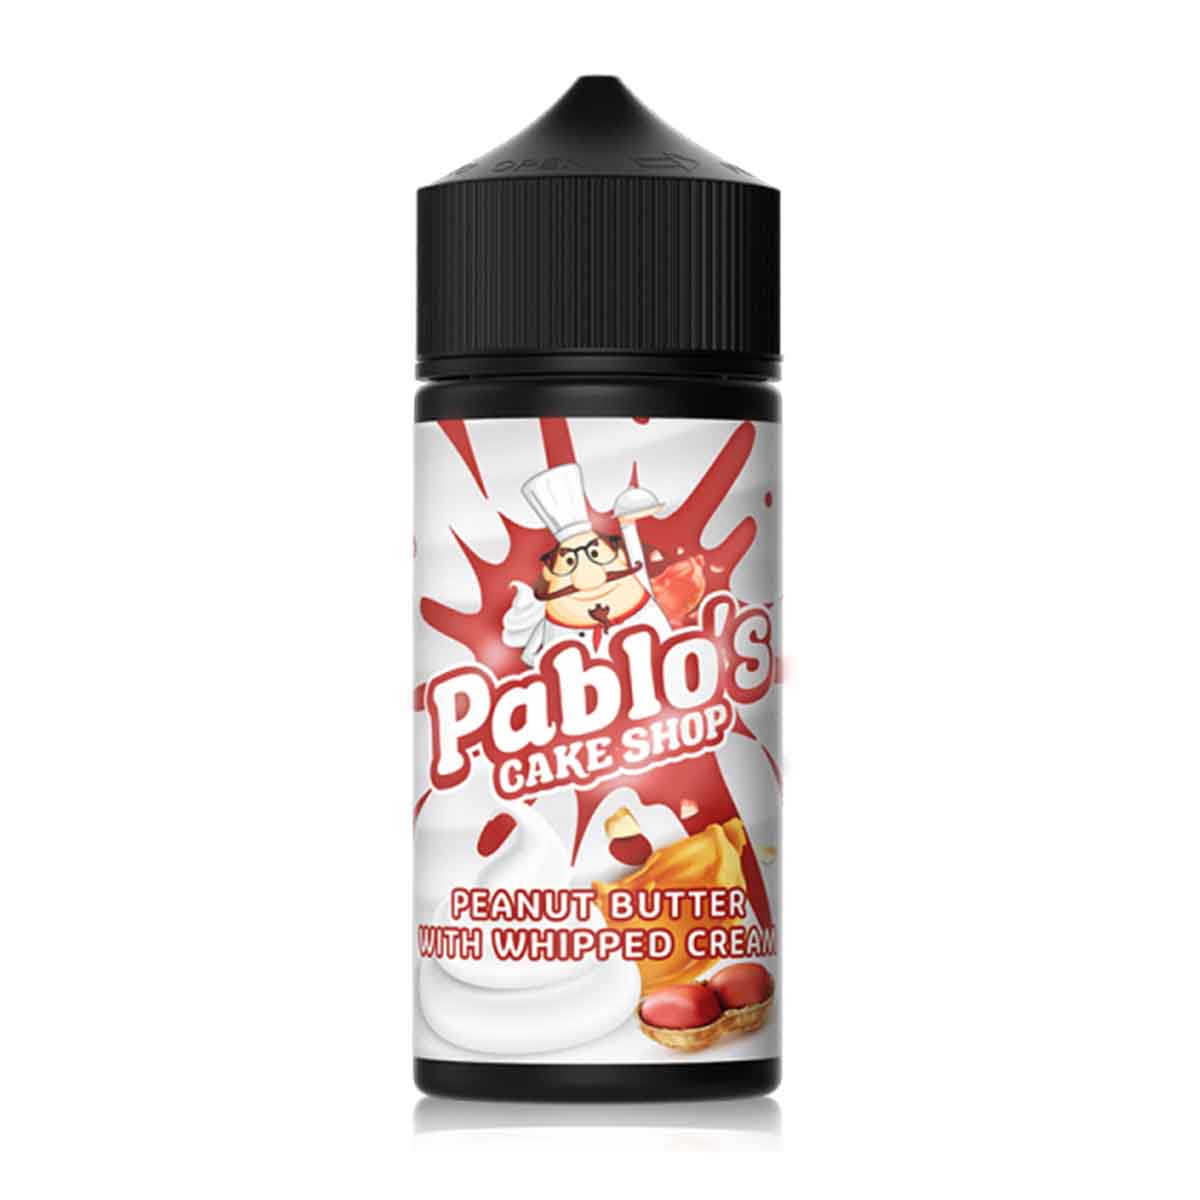 Peanut Butter with Whipped Cream by Pablo's Cake Shop Short Fill 100ml